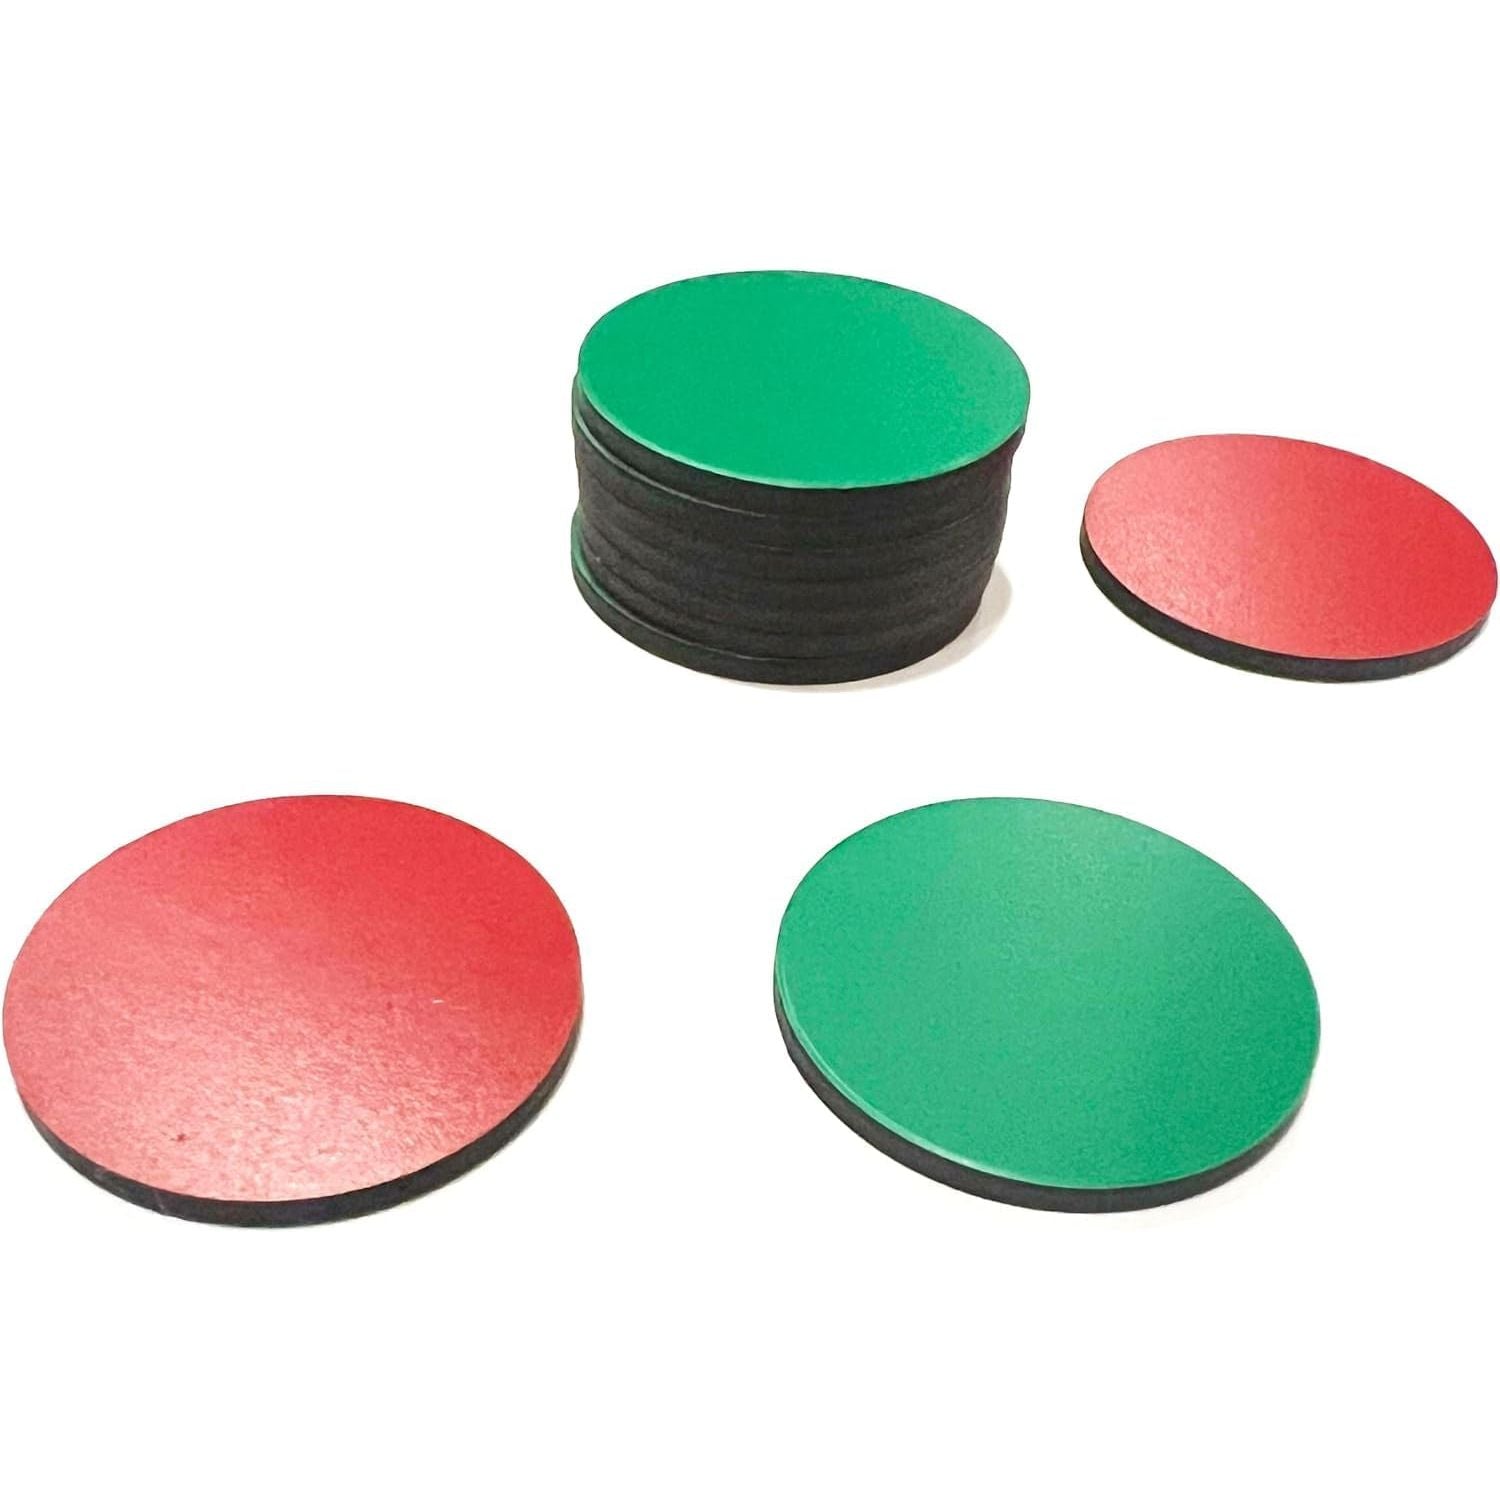 25-Pack Double-Sided Red/Green Flip Magnets (1" Diameter) - Versatile Go/No-Go Indicators